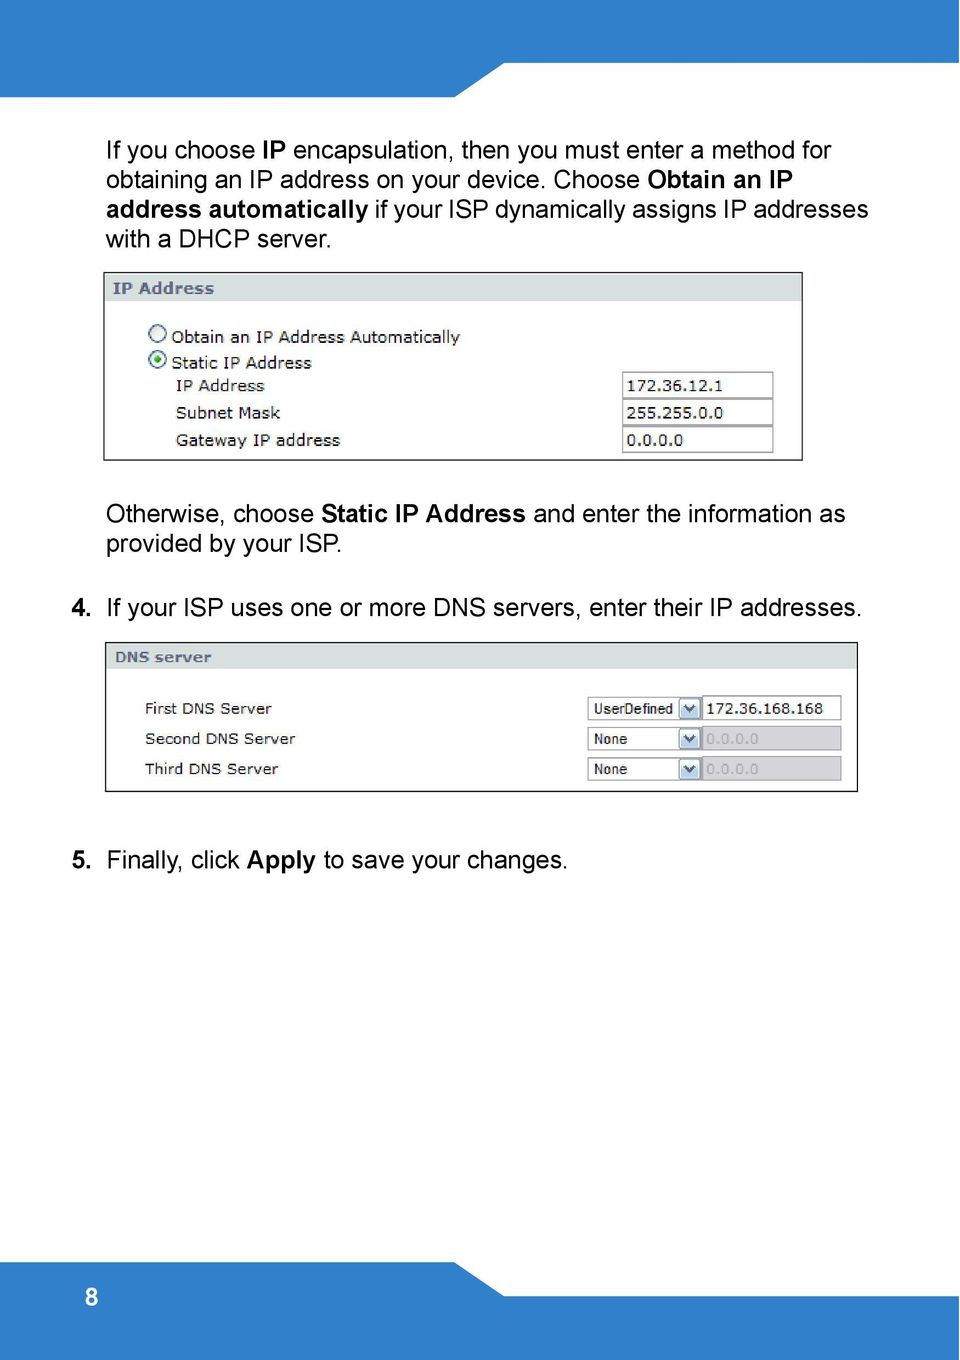 server. Otherwise, choose Static IP Address and enter the information as provided by your ISP. 4.